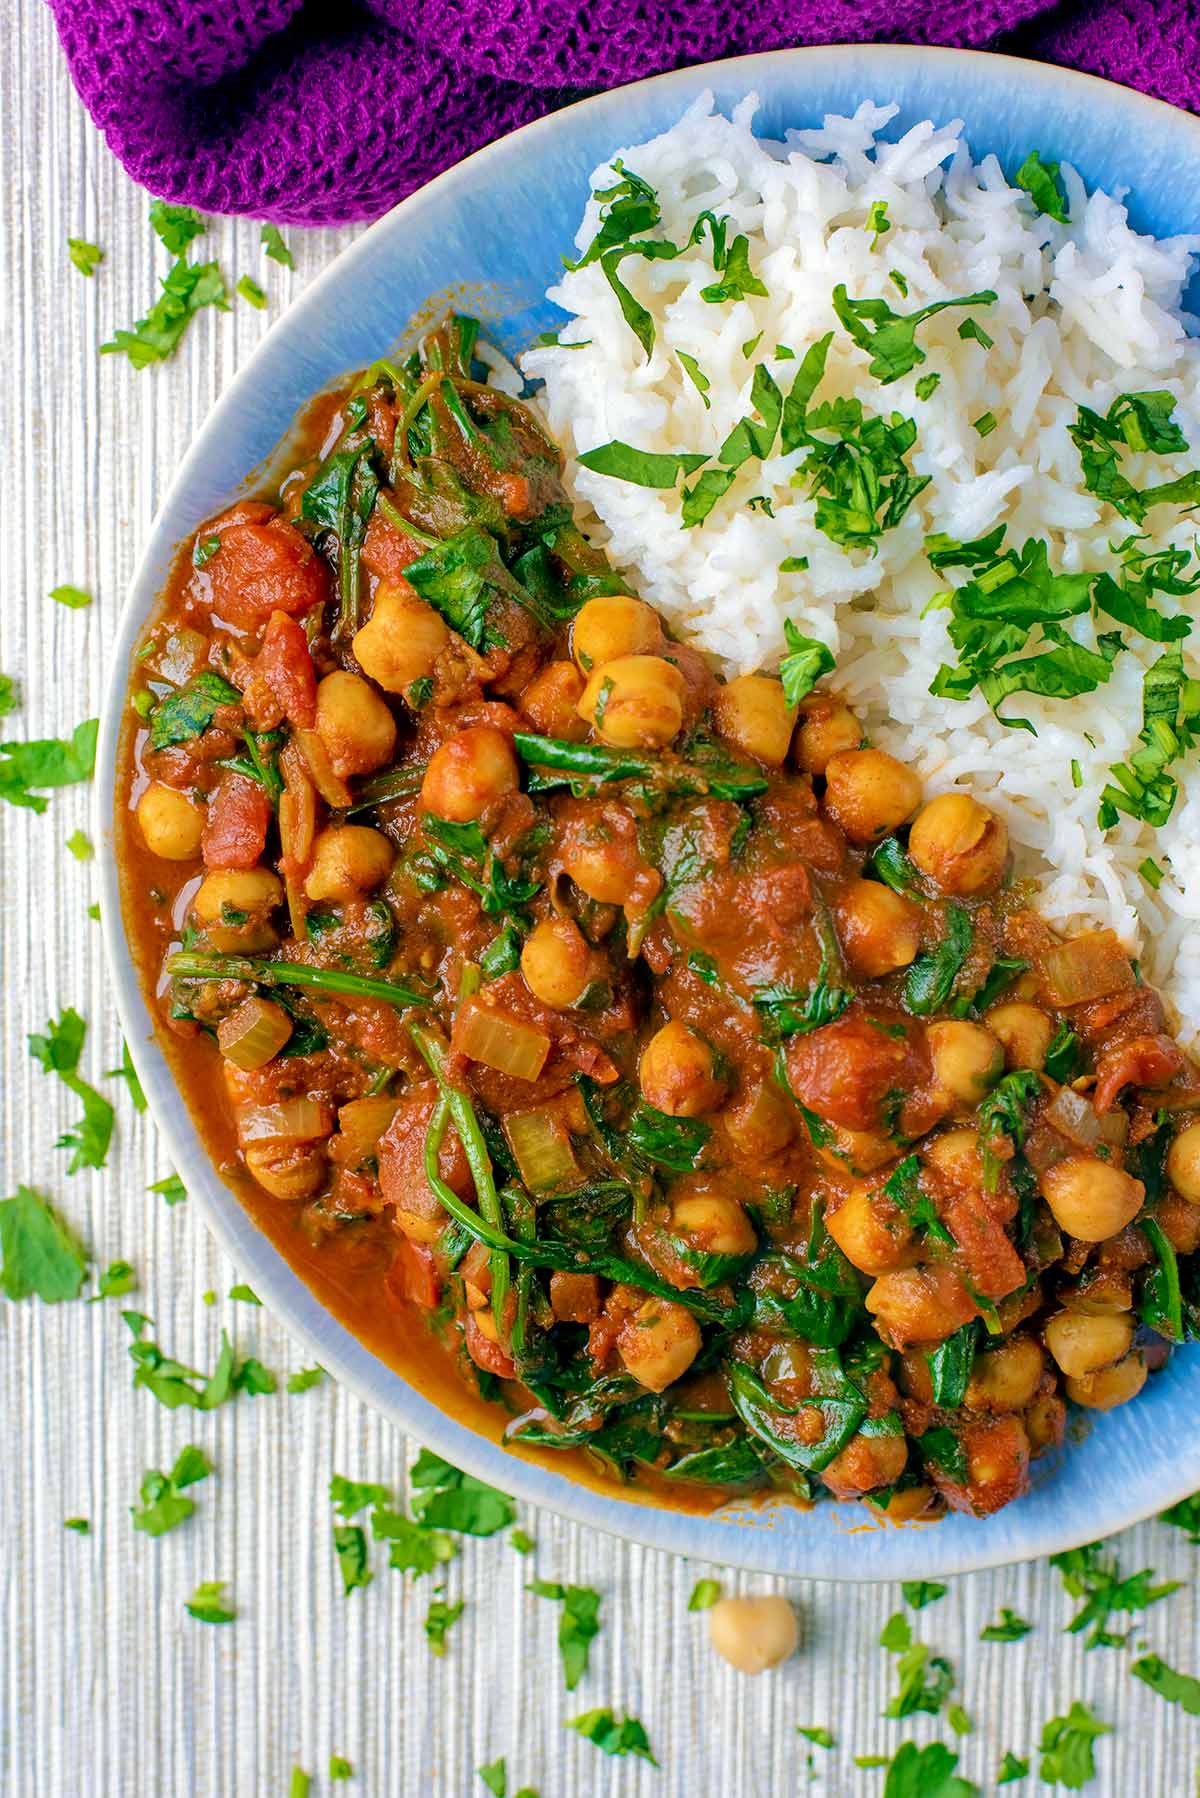 Chickpea and spinach curry on a blue plate with rice.